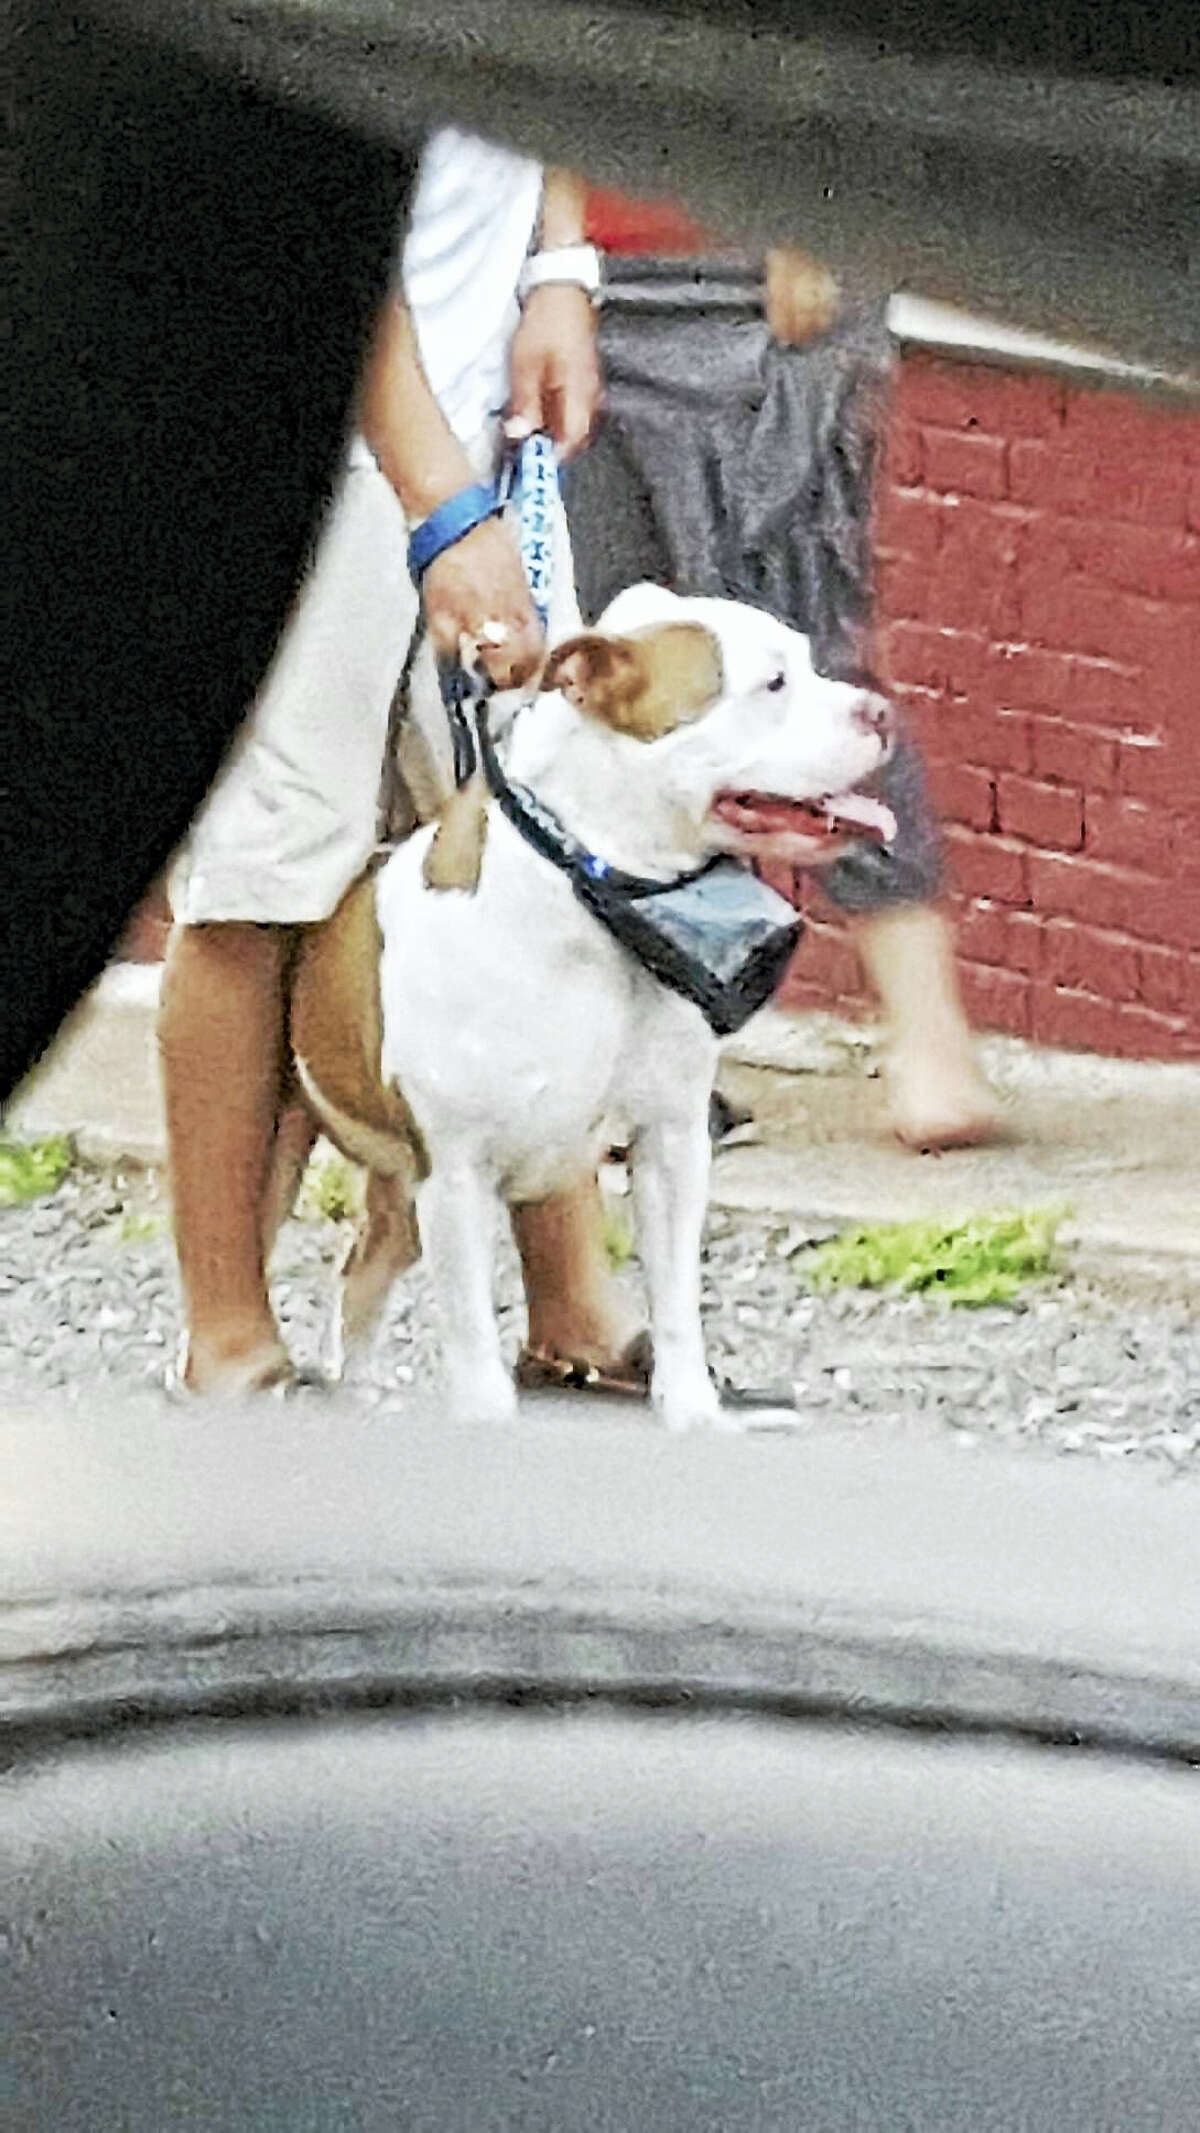 Peshie, a Pitbull mix required to wear a muzzle in public, is seen here without his muzzle, which is seen underneath his snout. This photo was taken after Animal Control ordered Peshie must wear a muzzle following a fatal attack of another dog. Courtesy of Narcisa Ortiz.